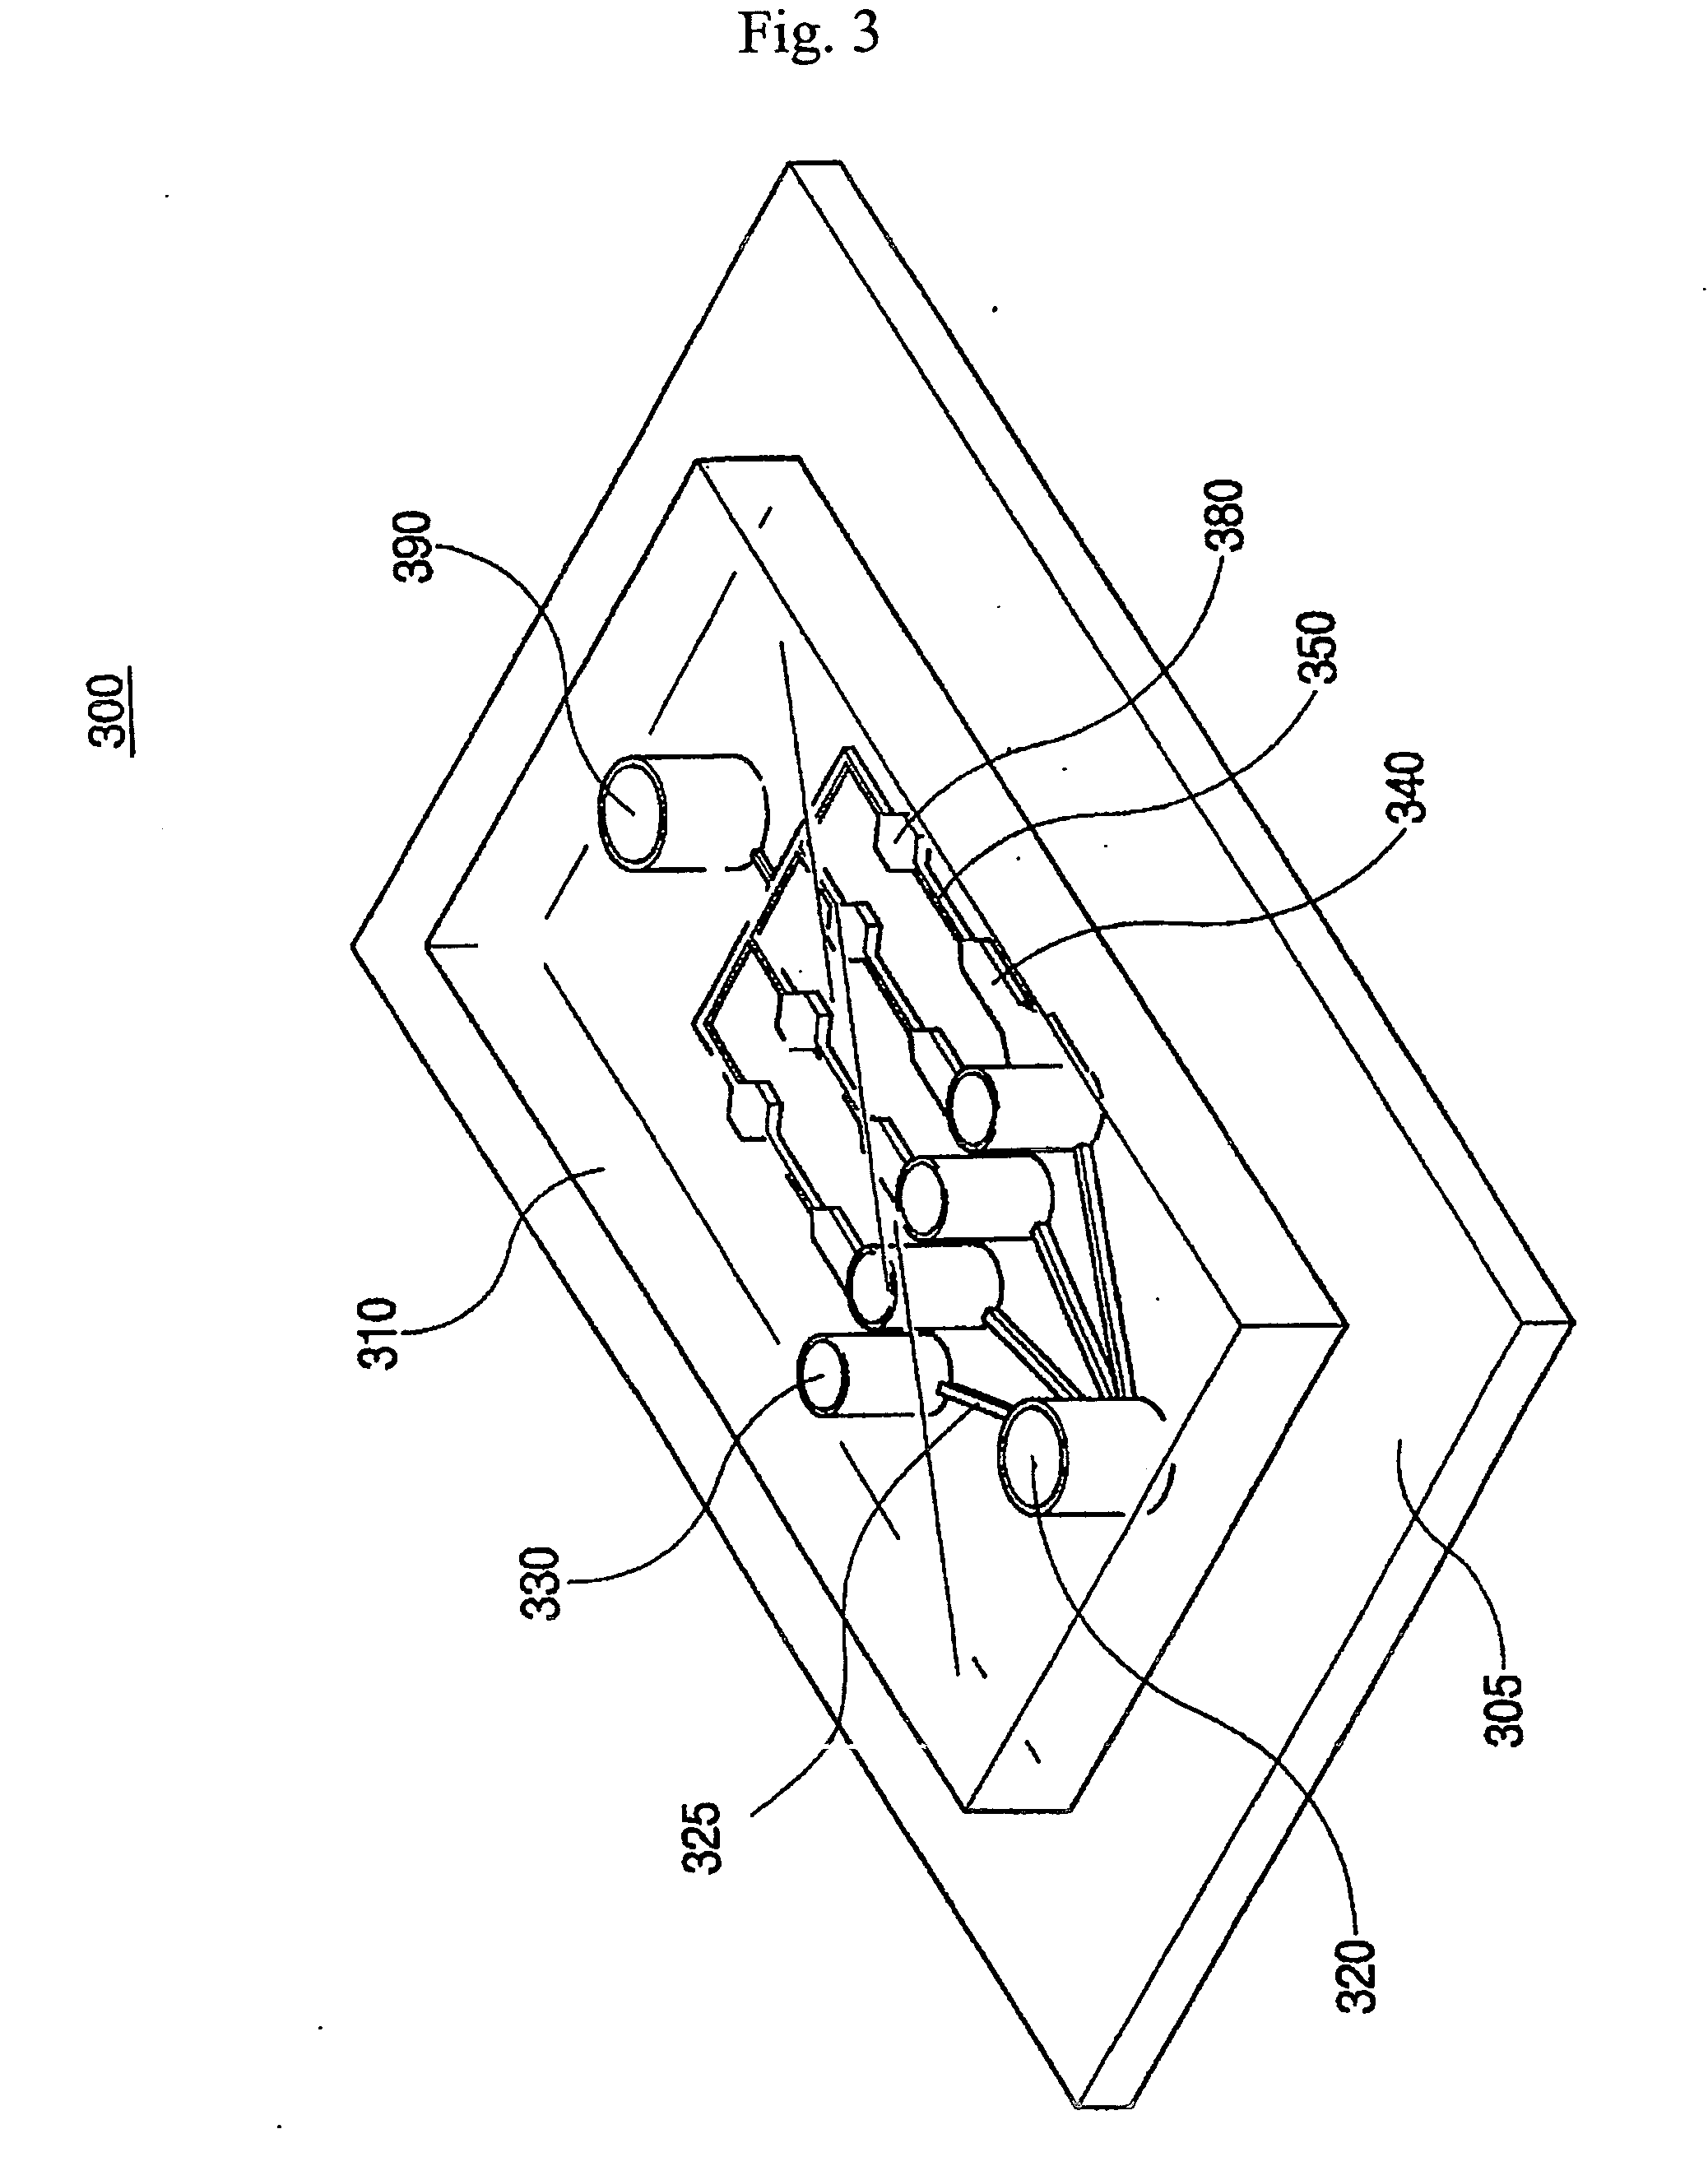 Method of examining blood type and apparatus for examining blood type using the method